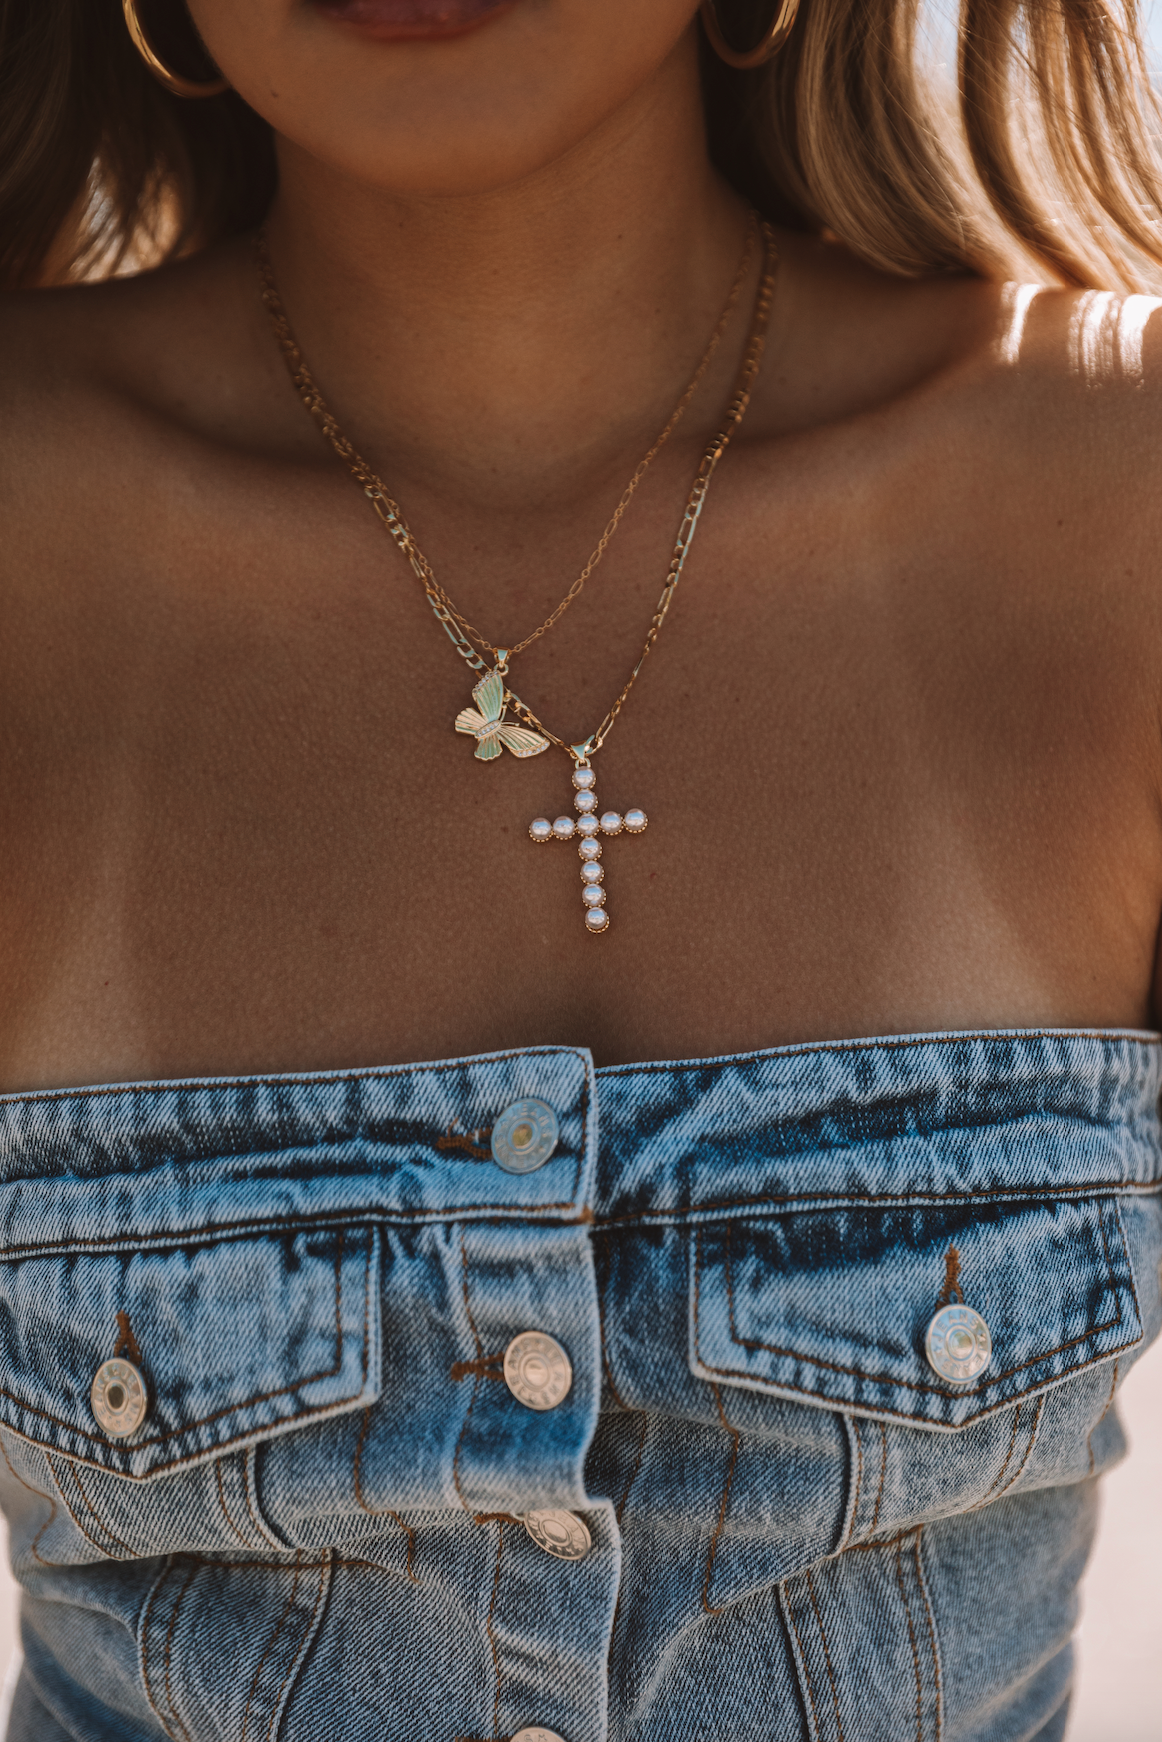 The Festival Cross Necklace